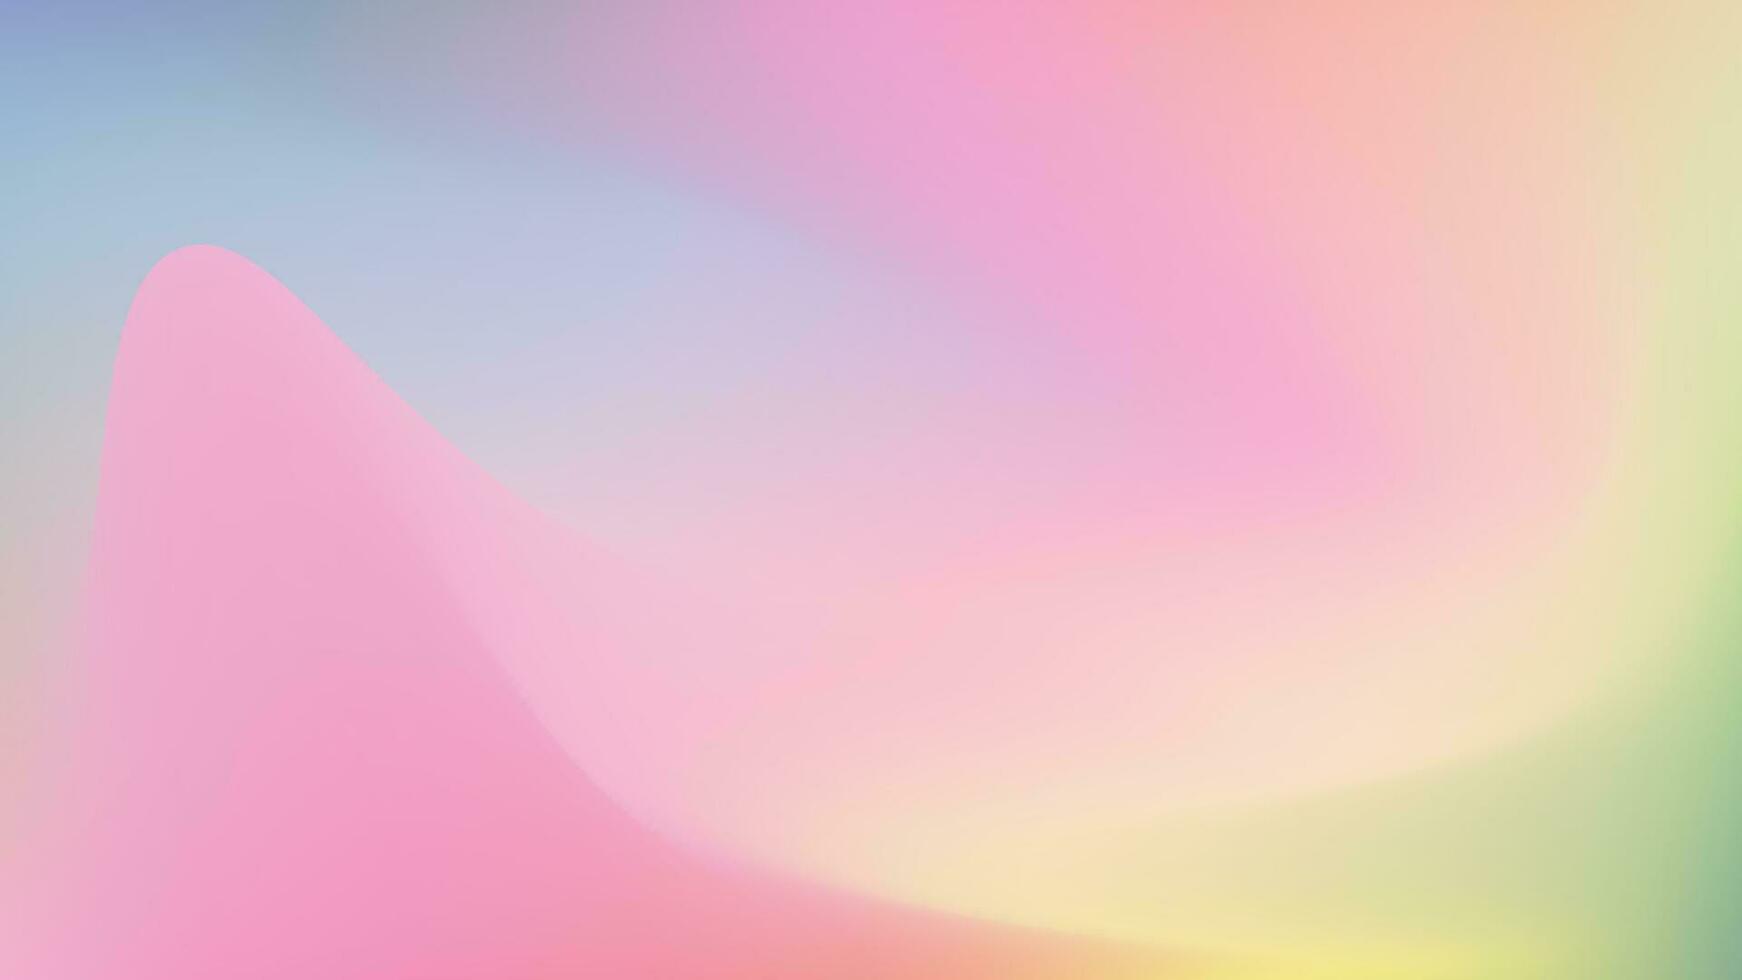 Abstract blurry gradient background in pastel holographic  colors. Blurred fluid wavy texture. Smooth transitions of iridescent colors. Modern colorful backdrop for banner, flyer, website vector